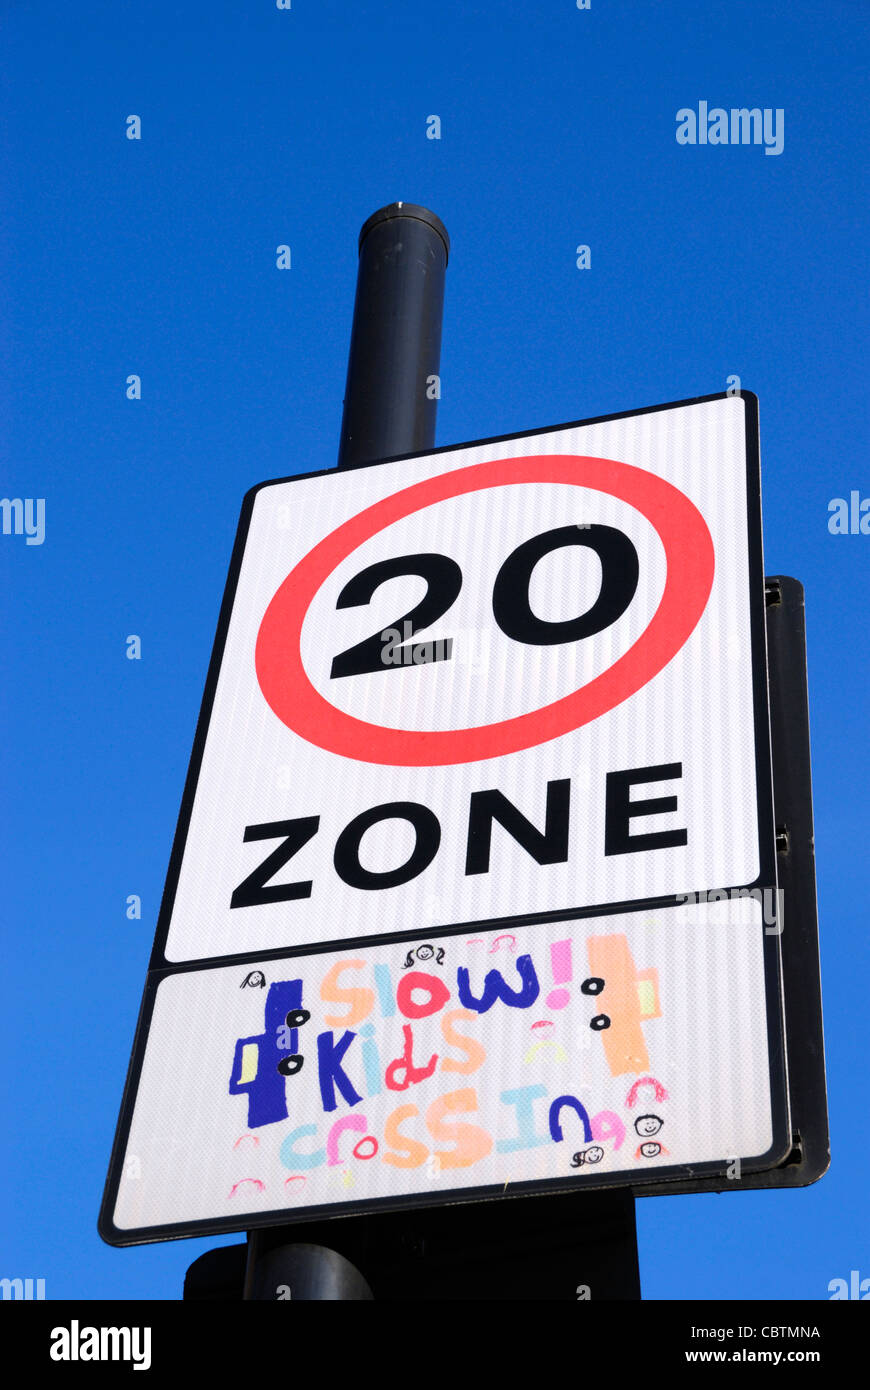 20 miles per hour speed limit zone road sign Stock Photo